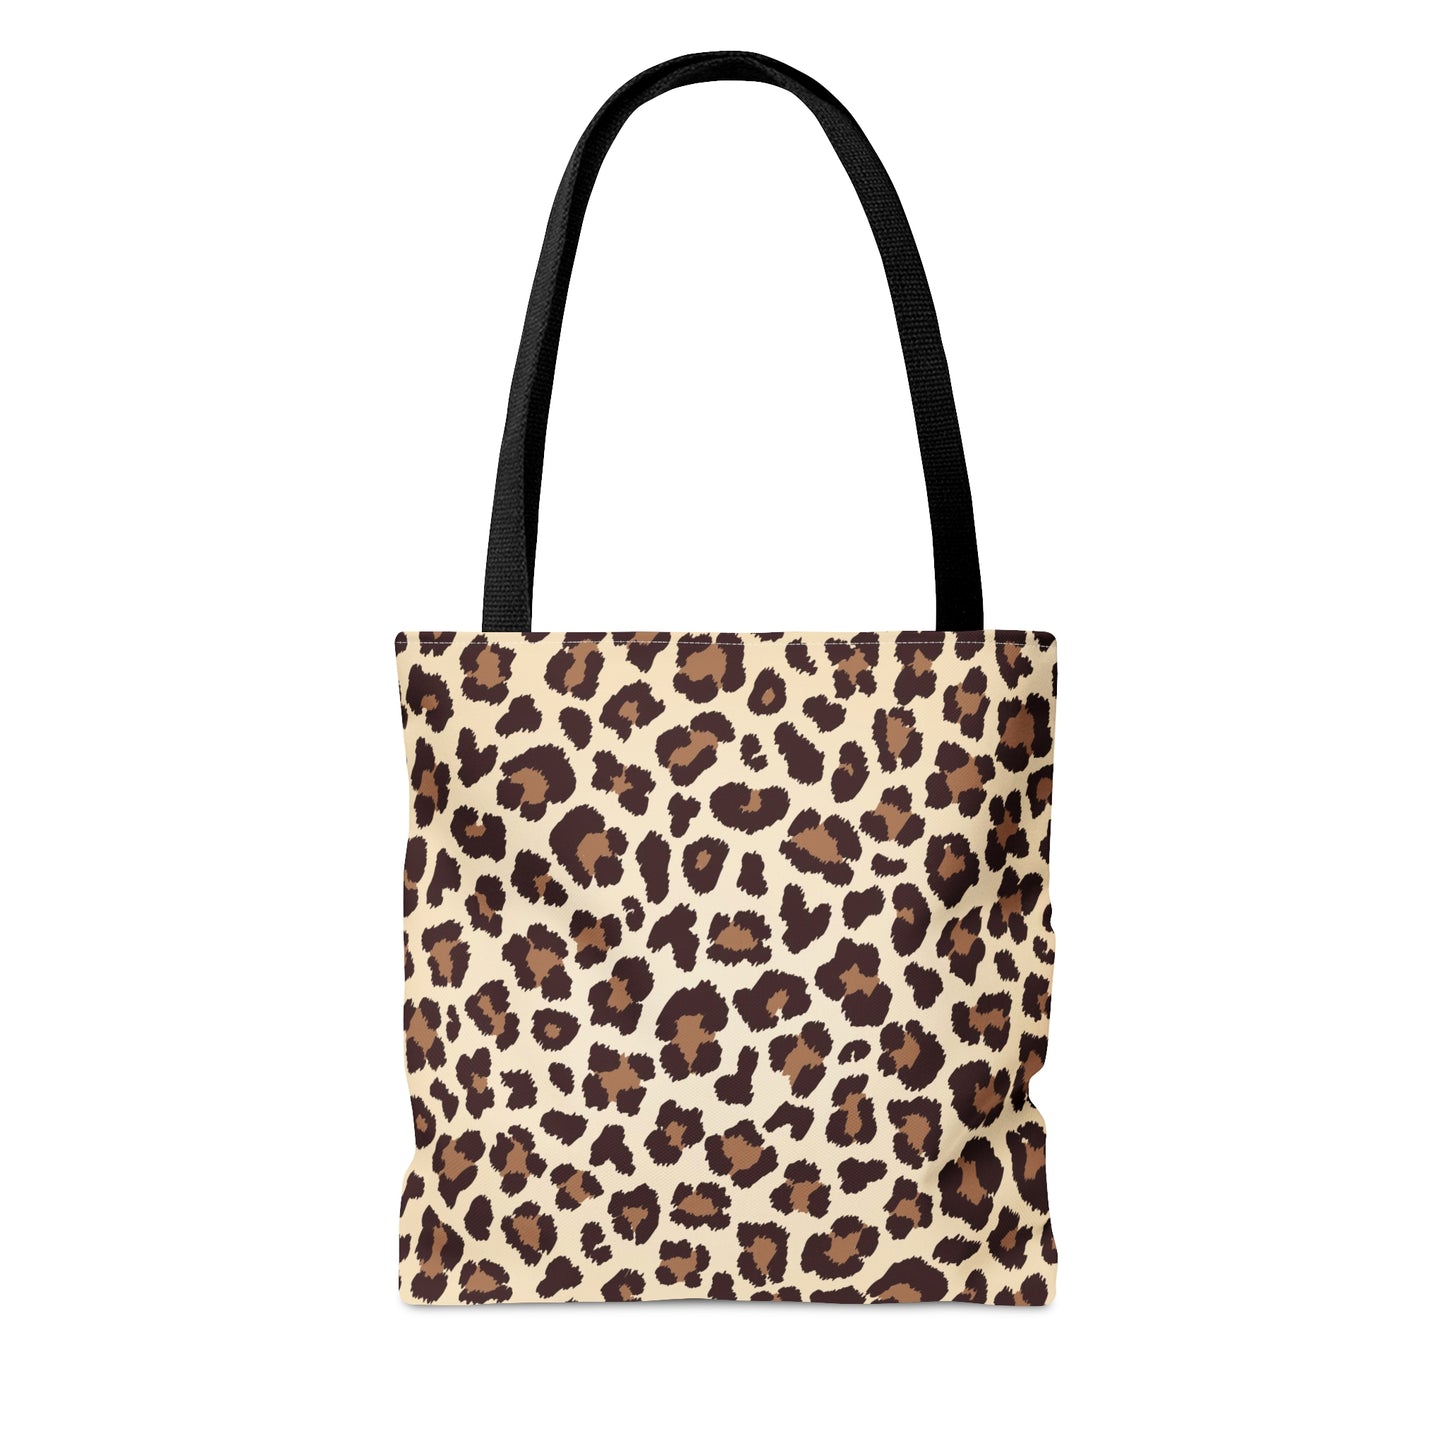 Leopard Print Tote Bag, Book Bag, Travel Bag, Grocery Bag, Handy Tote, Bag for School, Gifts For Her, Gifts For Teacher